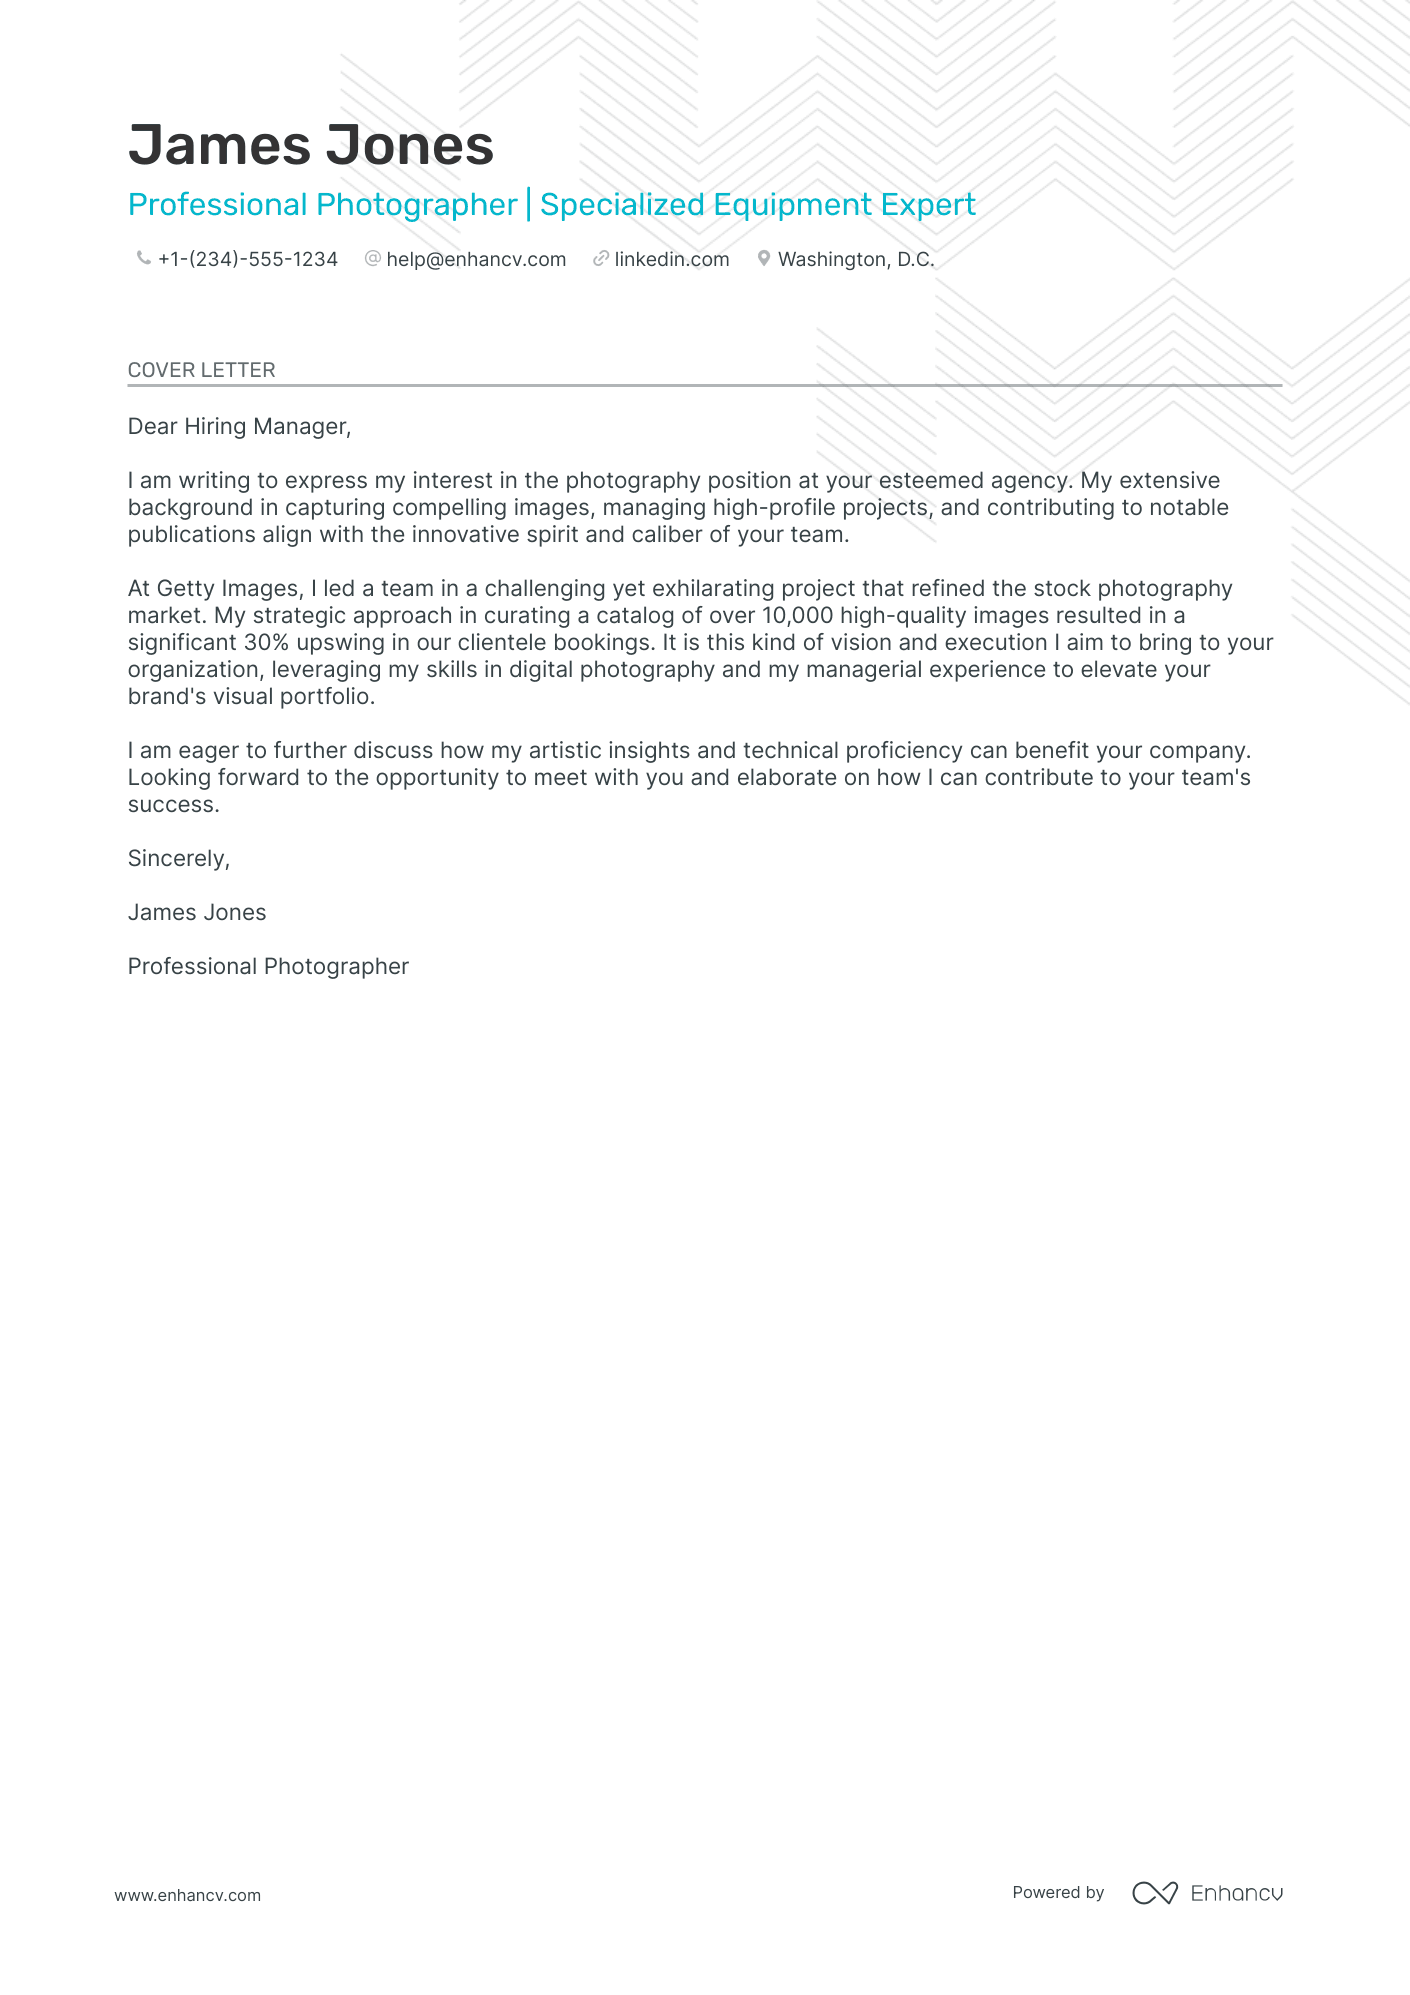 application letter as a photographer